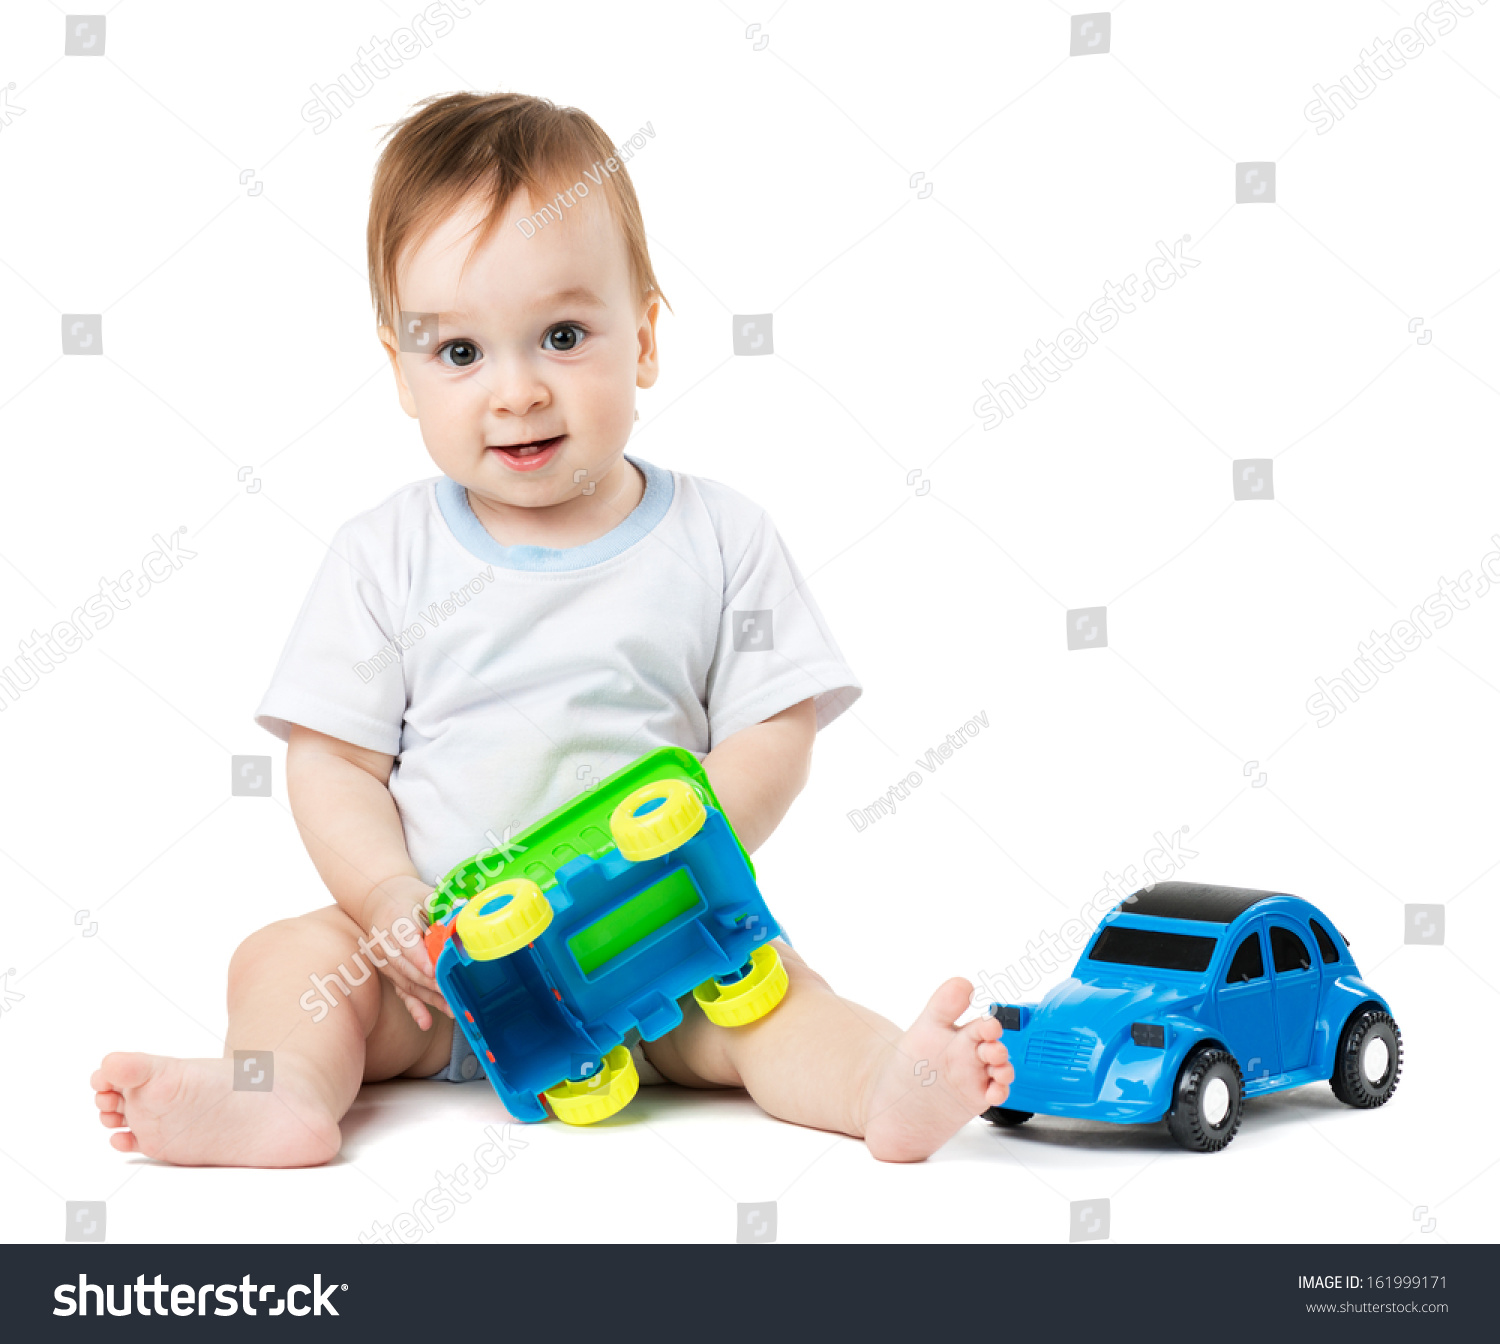 cars for babies to play in